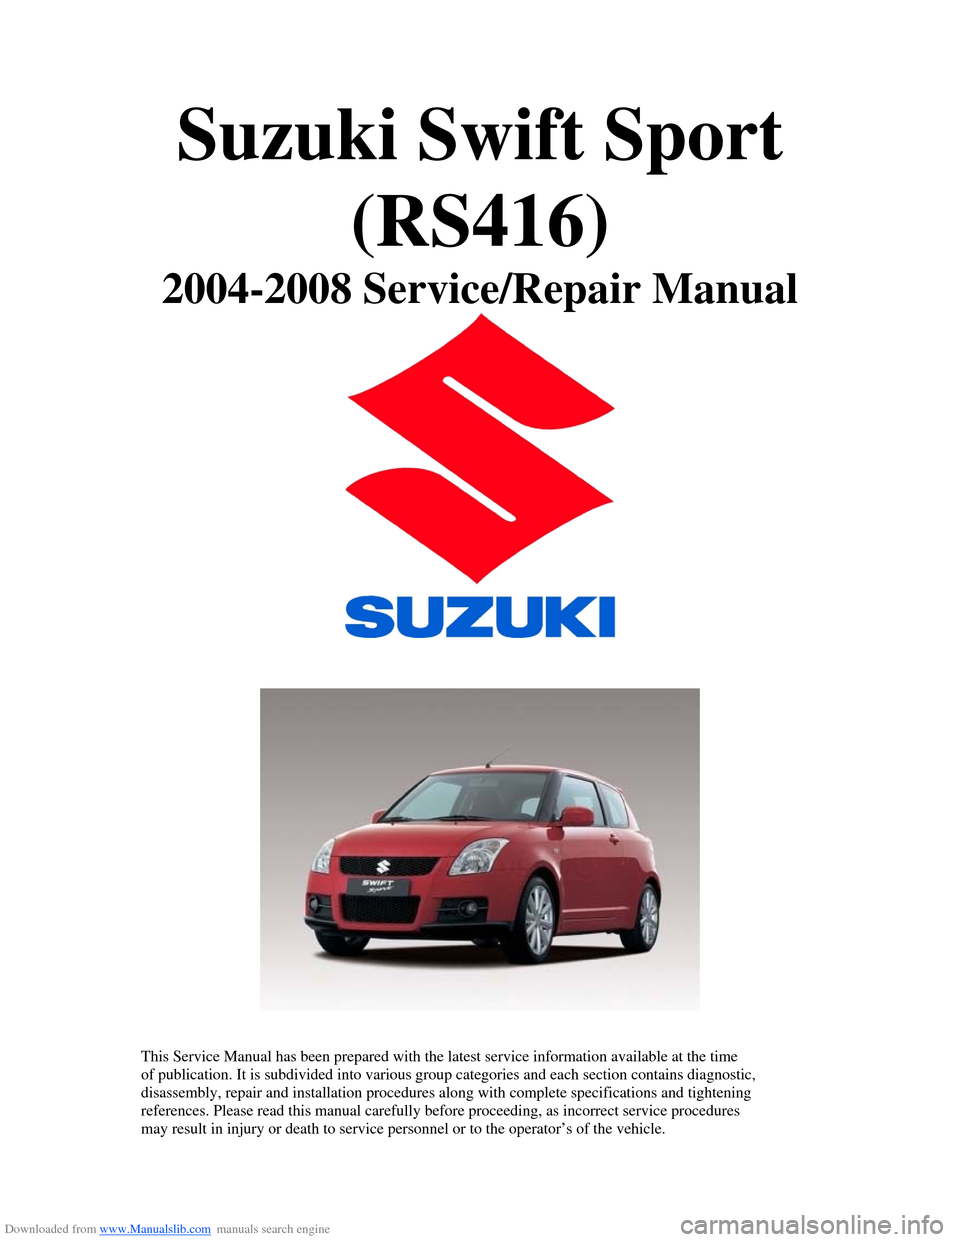 SUZUKI SWIFT 2005 2.G Service Workshop Manual Downloaded from www.Manualslib.com manuals search engine Suzuki Swift Sport (RS416) 
2004-2008 Service/Repair Manual 
 
 
  
 
This Service Manual has been prepared with the latest service information